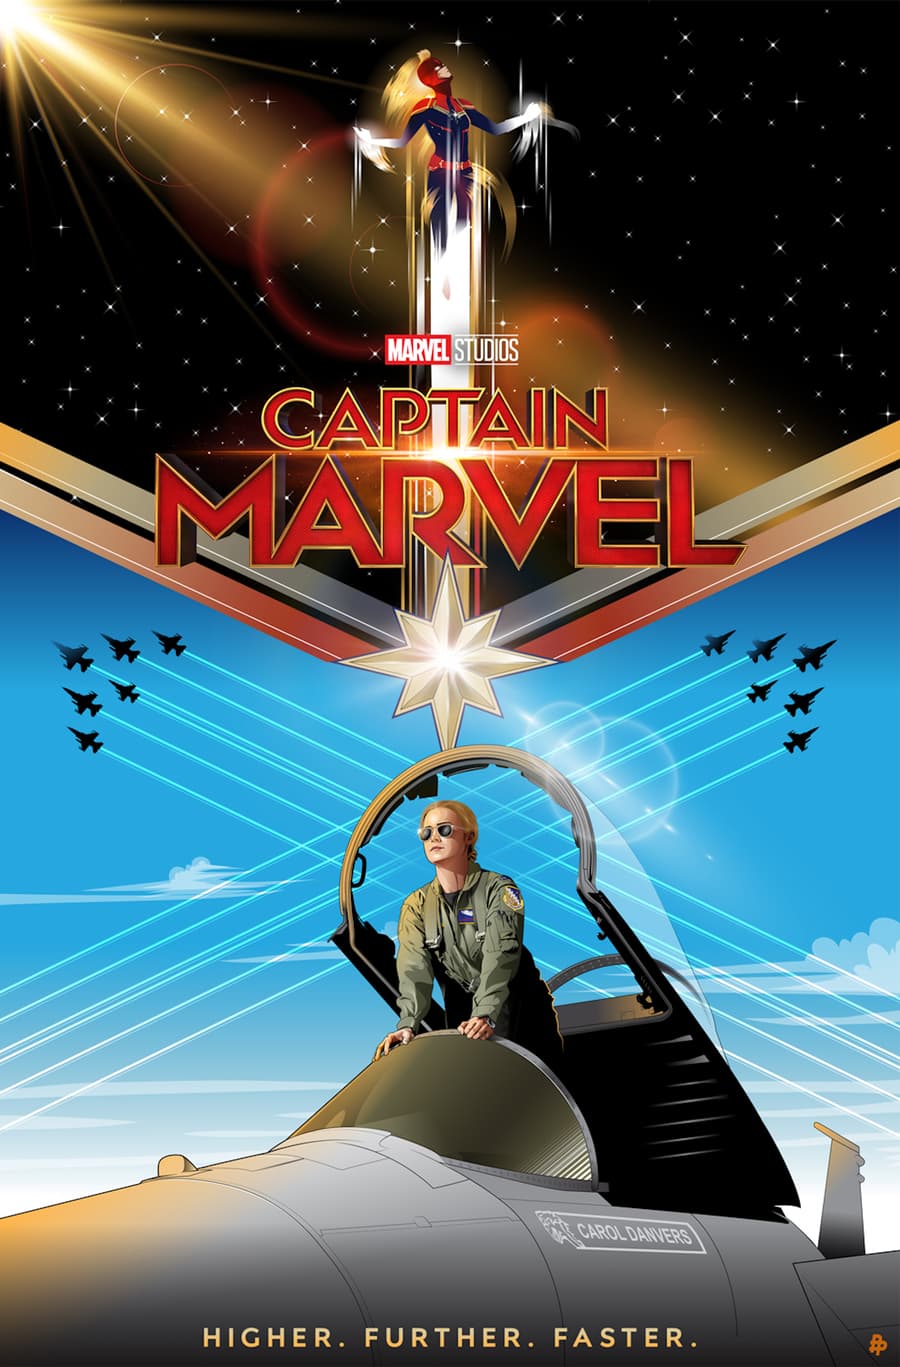 Captain Marvel Poster Art by Cryssy Cheung